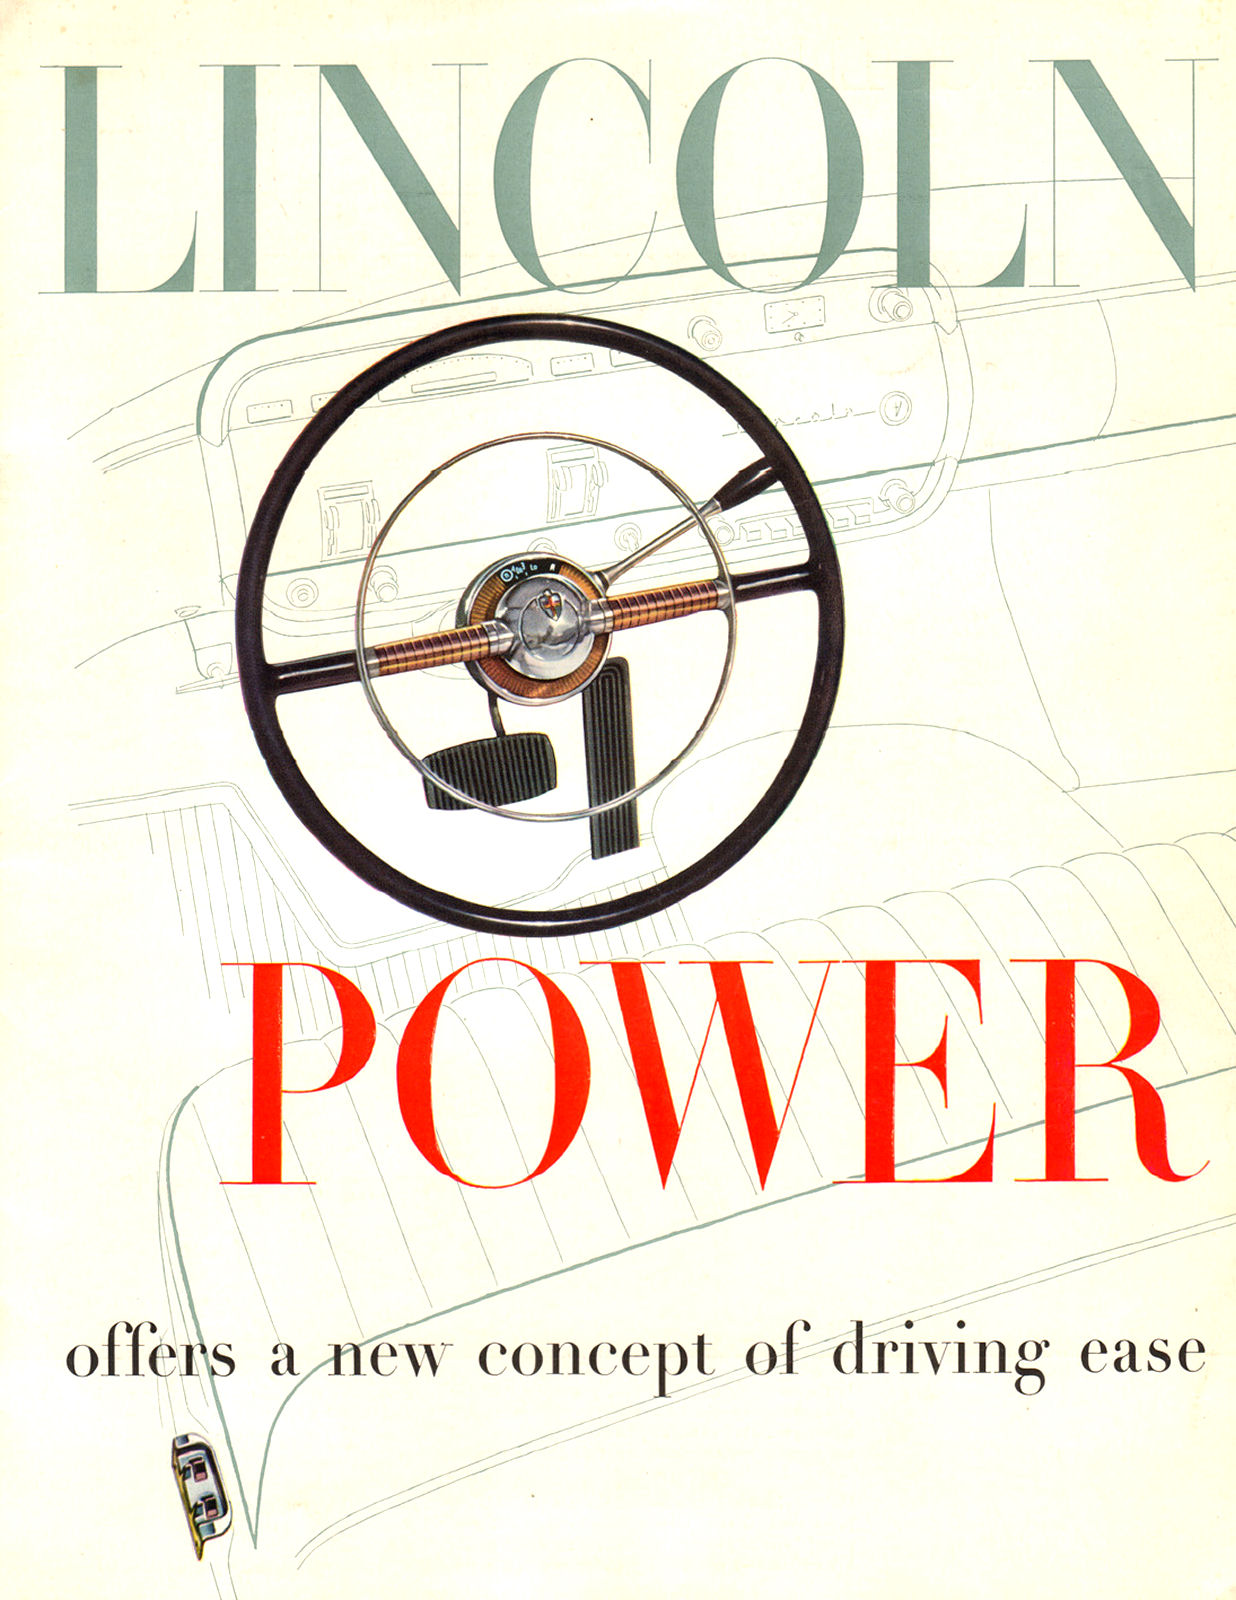 1953 Lincoln Power.pdf-2024-2-16 19.45.40_Page_1